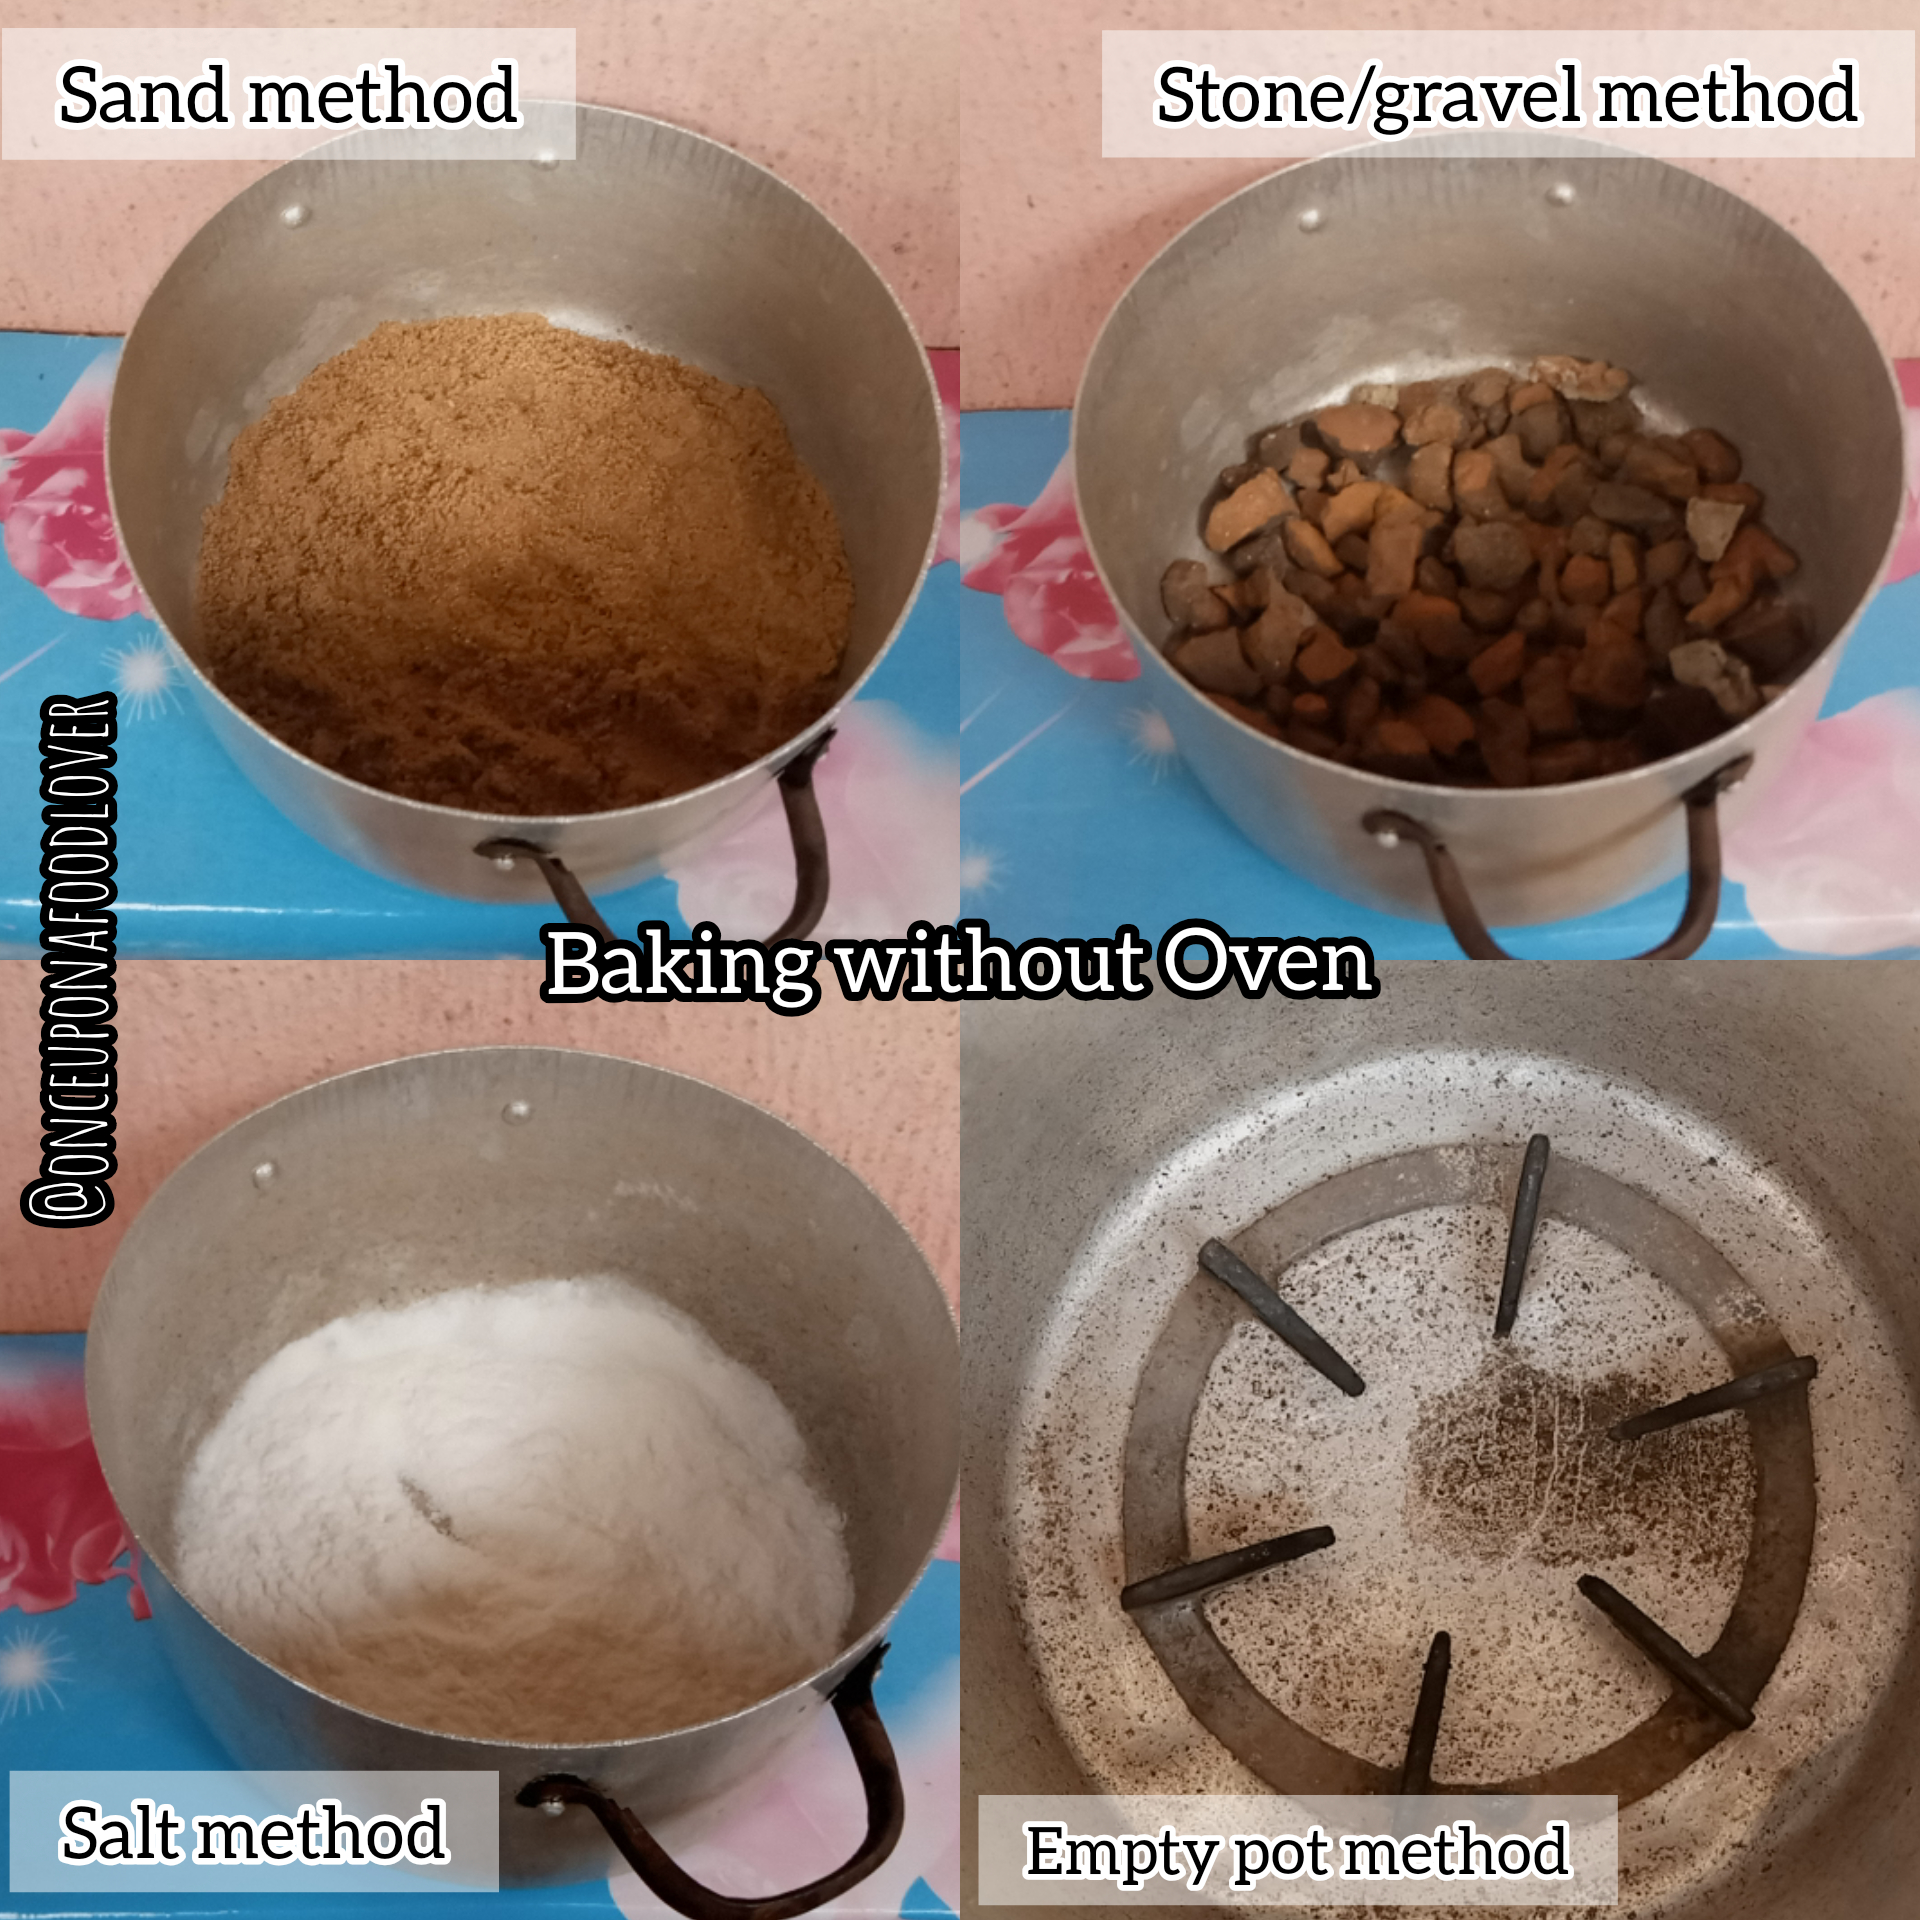 How to Bake without Oven (Pot method)